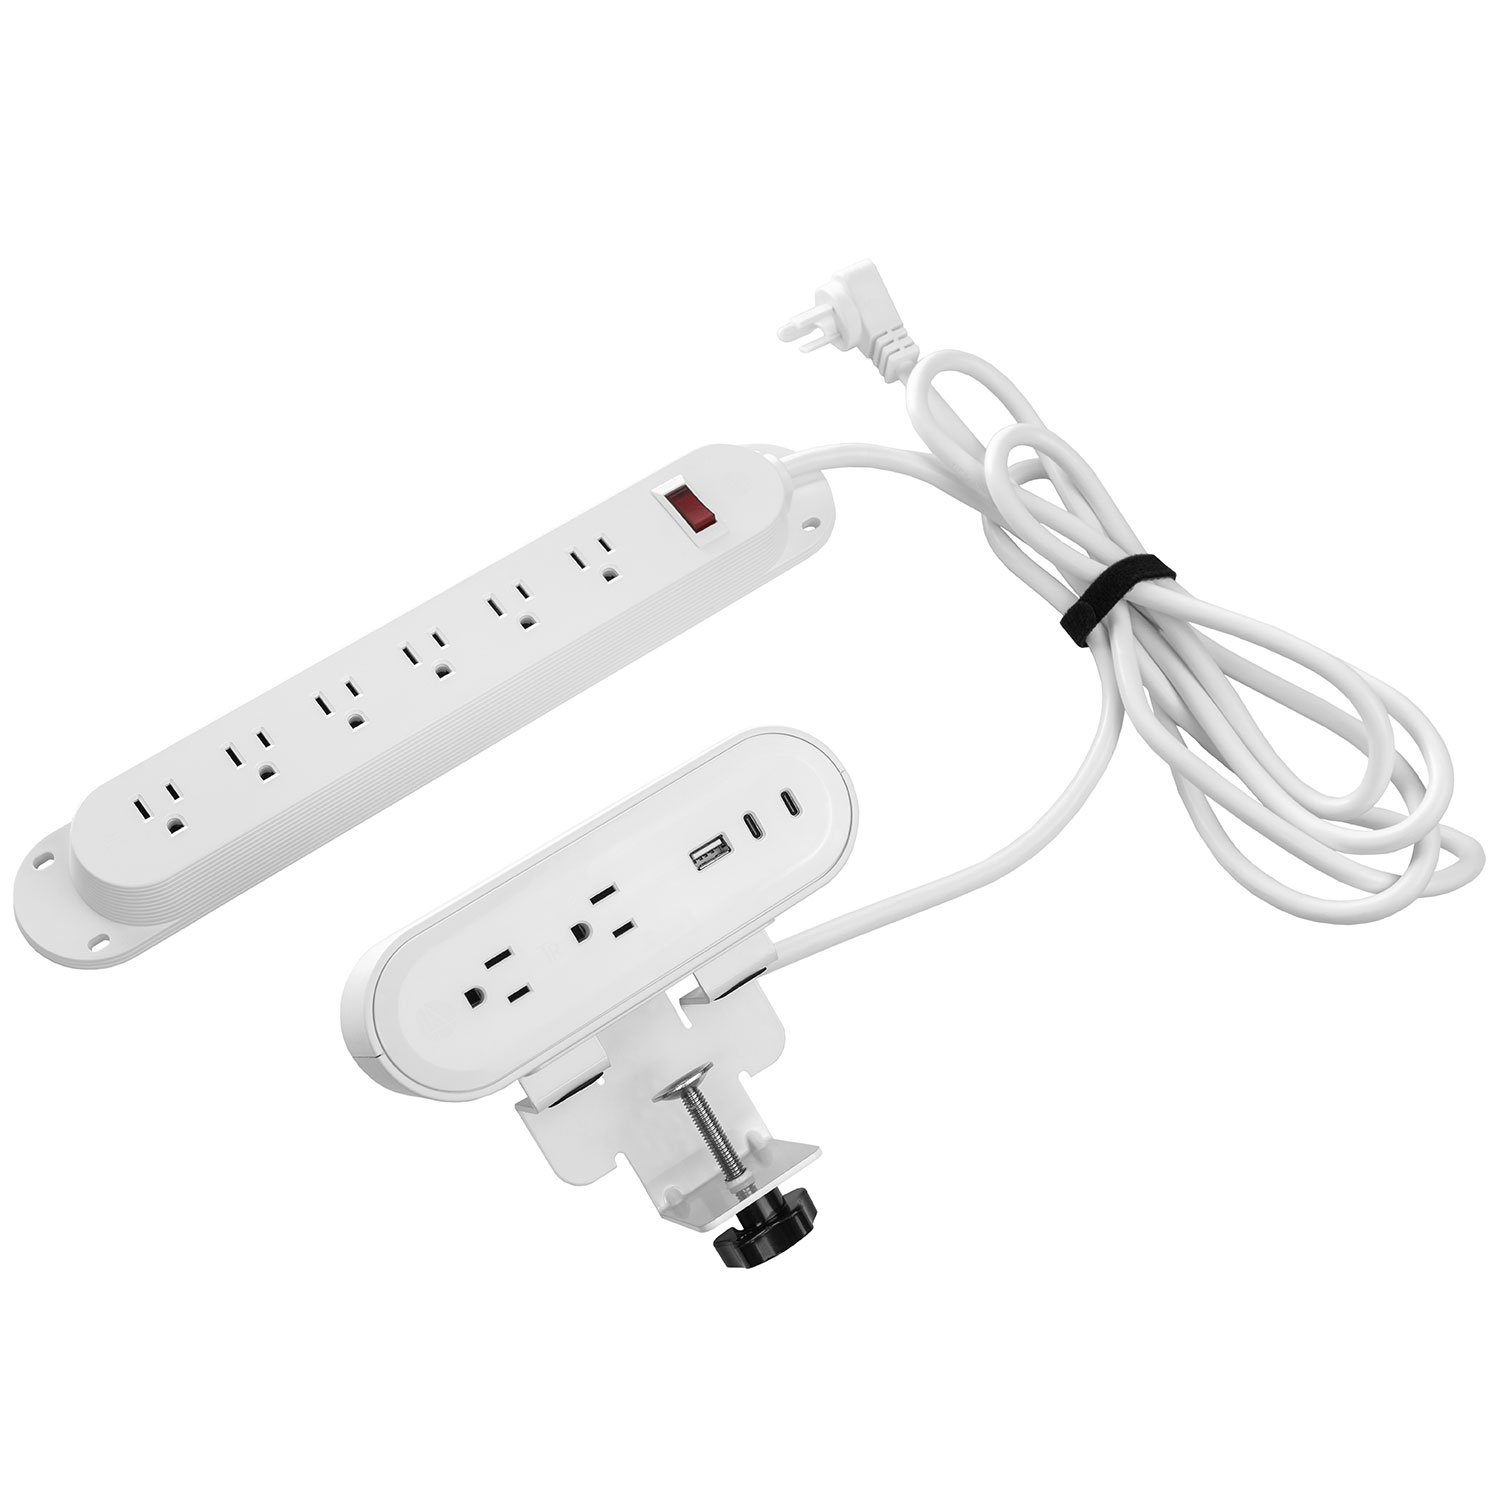 Hat Collective PWR-ACC-STRP Reya Power Strip with Hardwired Surface Module